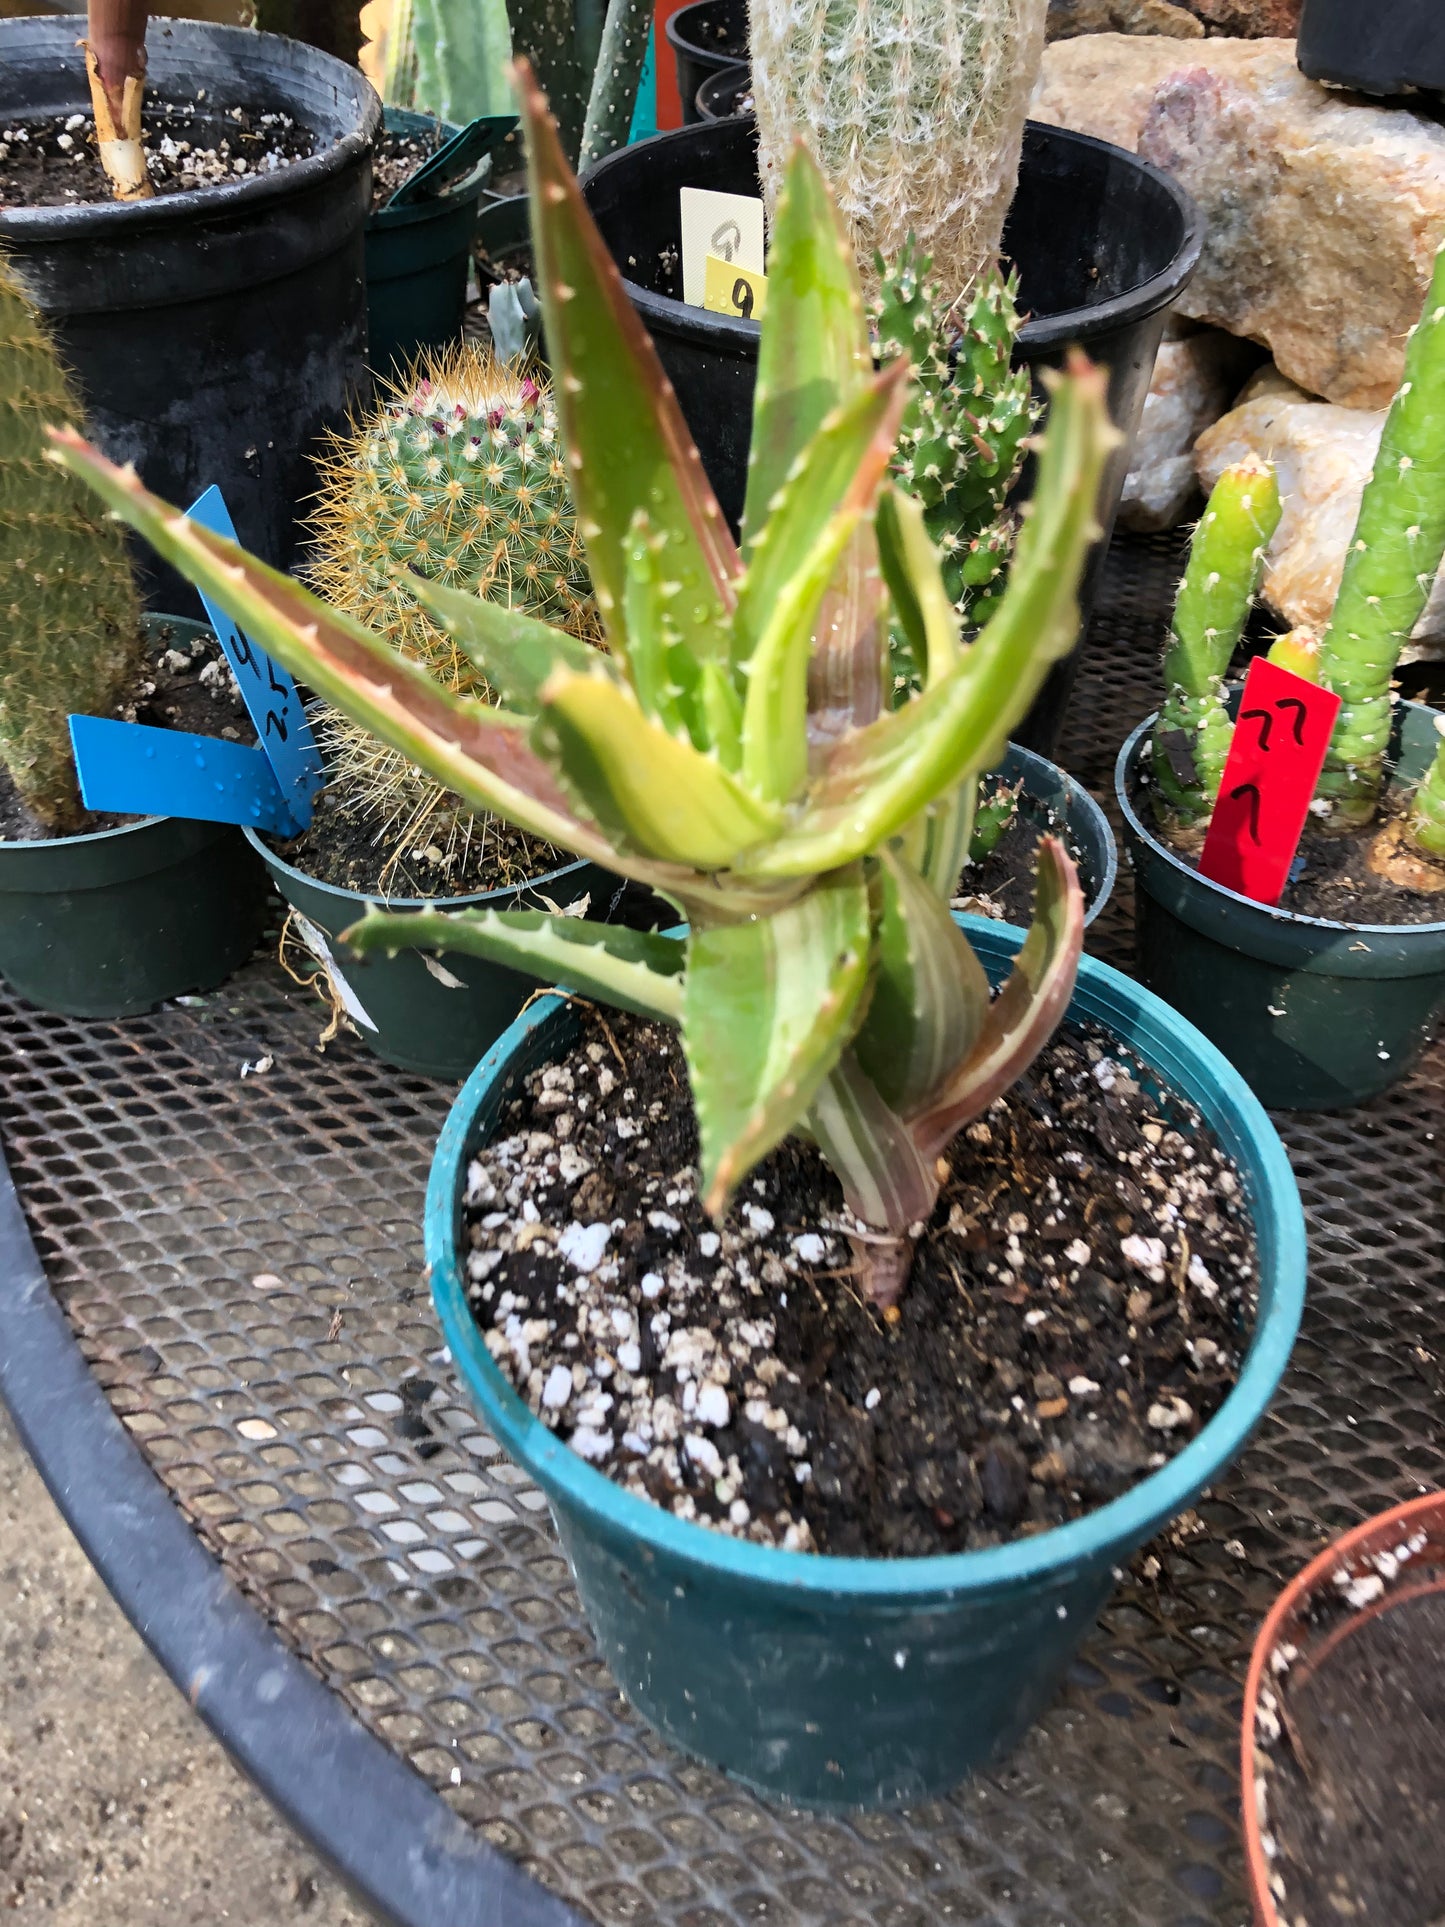 Golden Toothed Aloe - Aloe nobilis variegata Succulent 4" Wide 4" Tall